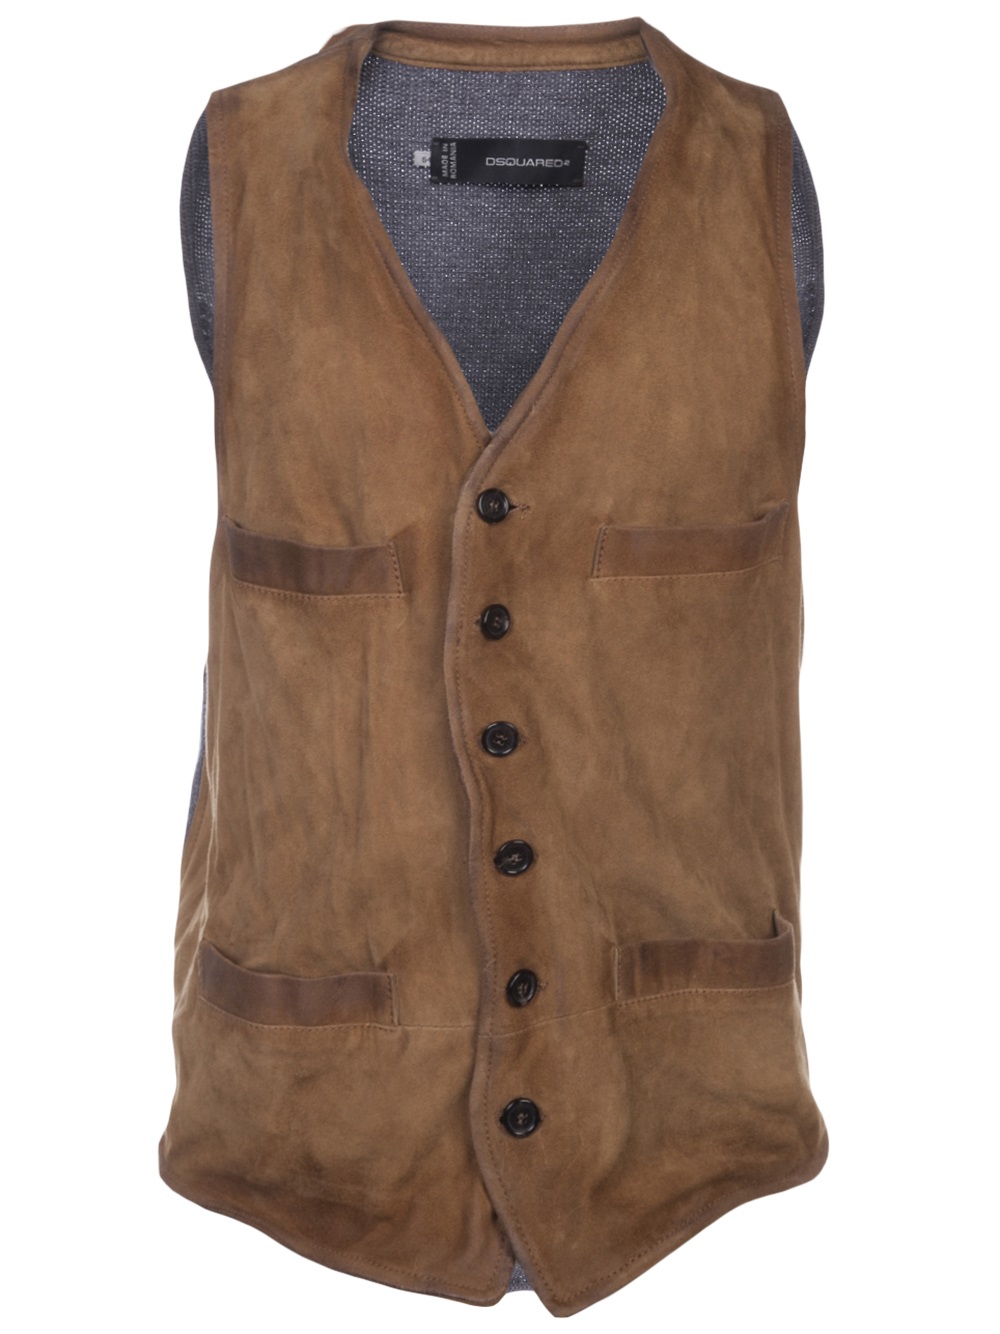 Lyst - Dsquared² Leather Knit Gilet in Brown for Men